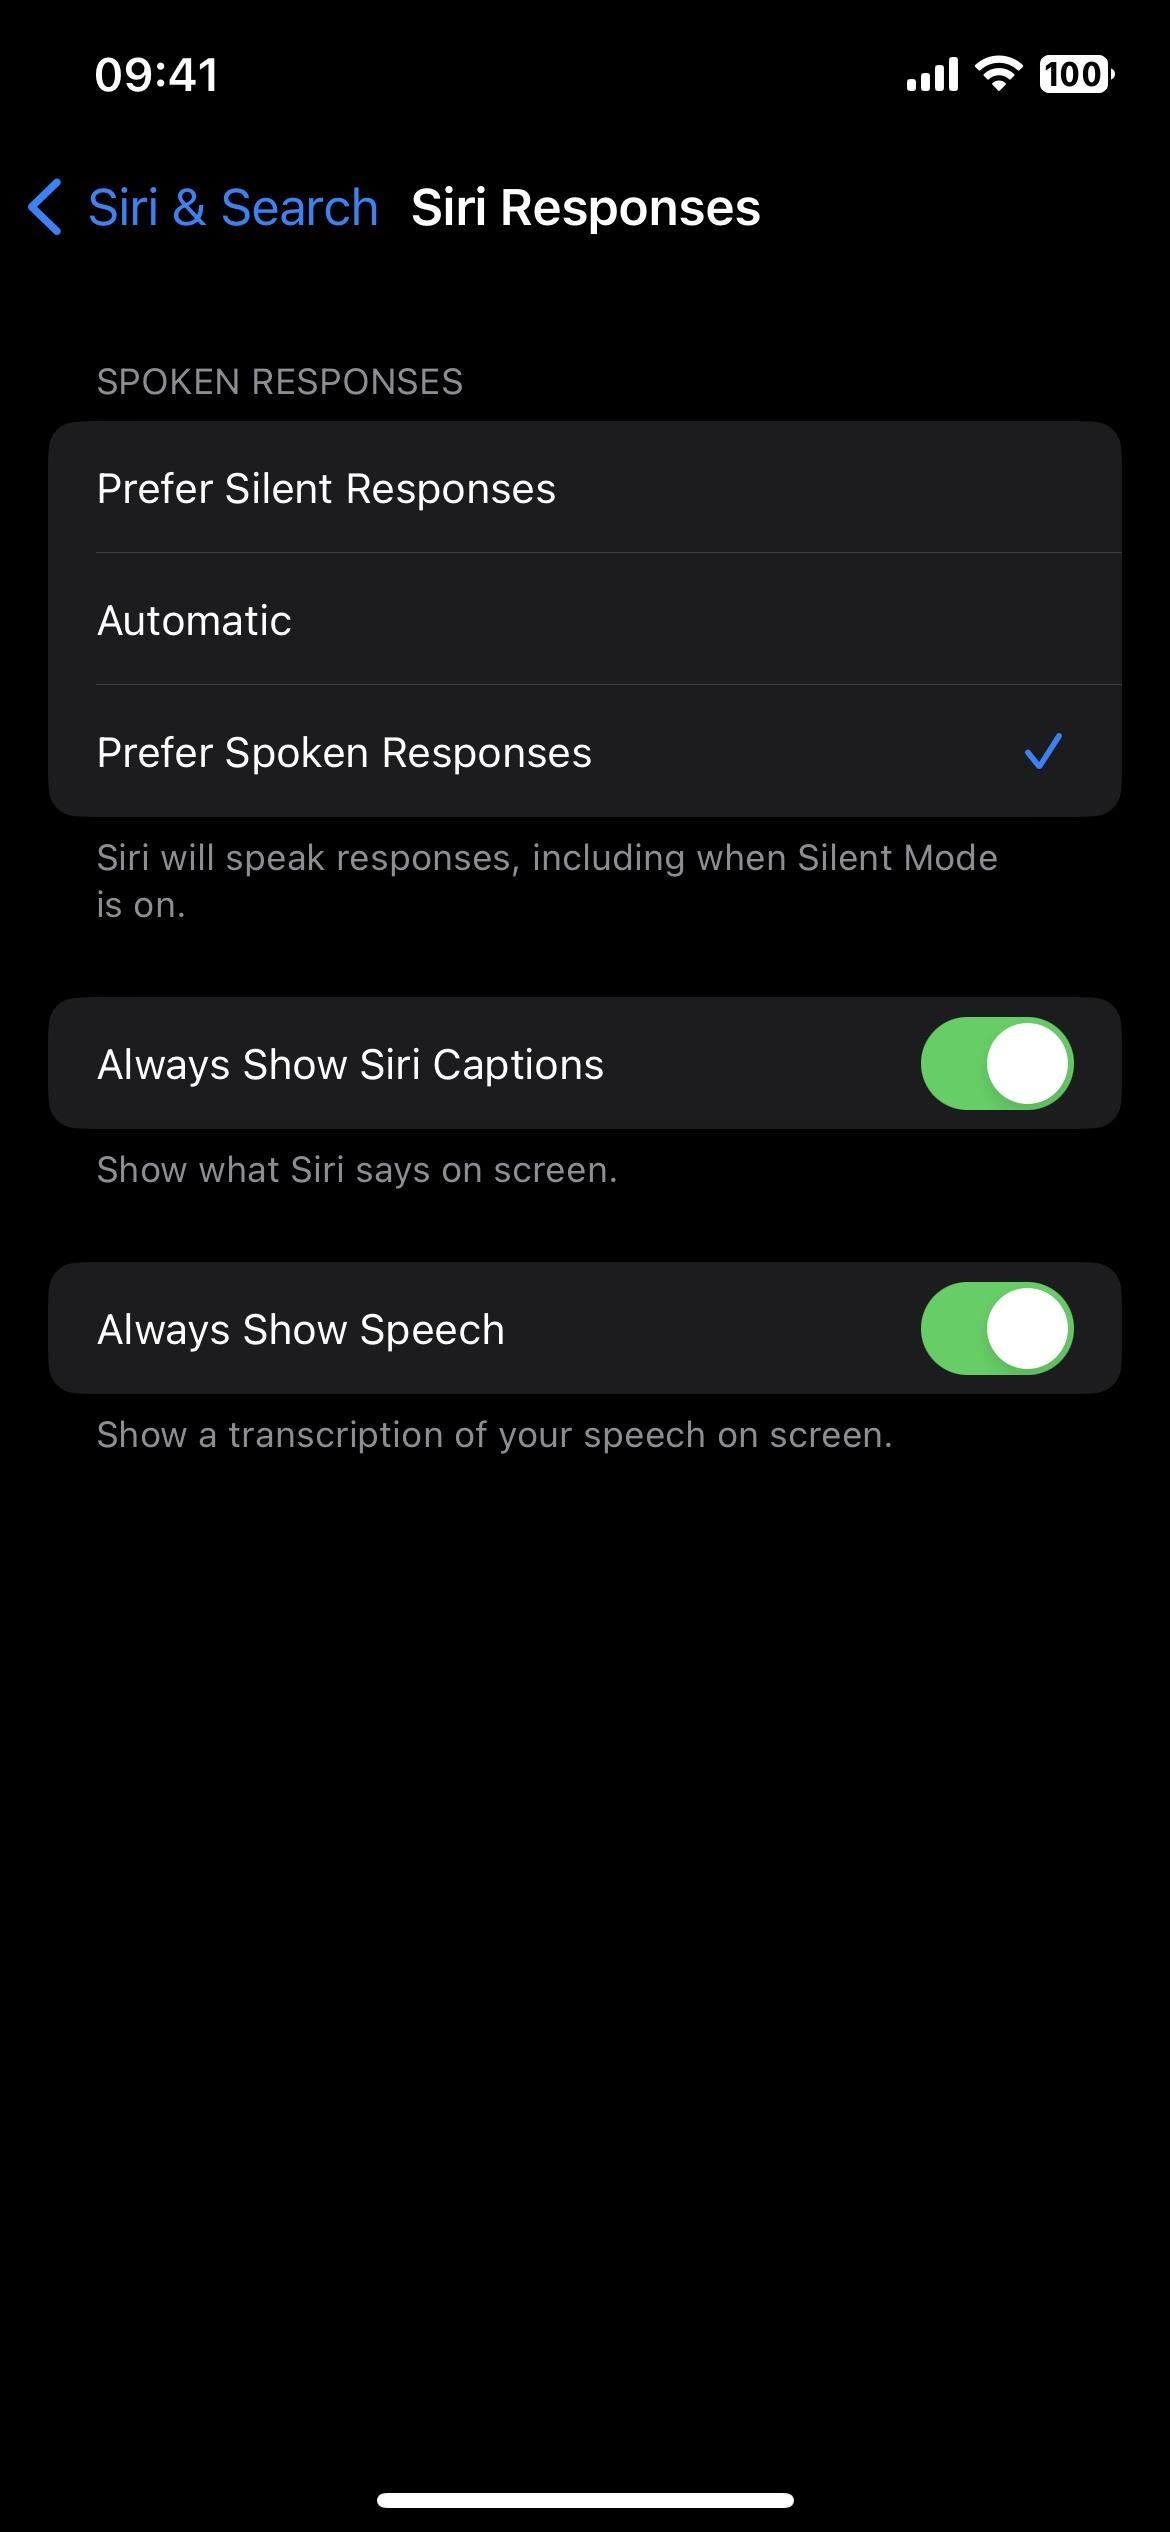 Apple Just Fixed Siri's Voice Feedback Issue on iOS 16, Giving You Back More Control Over Audible Responses